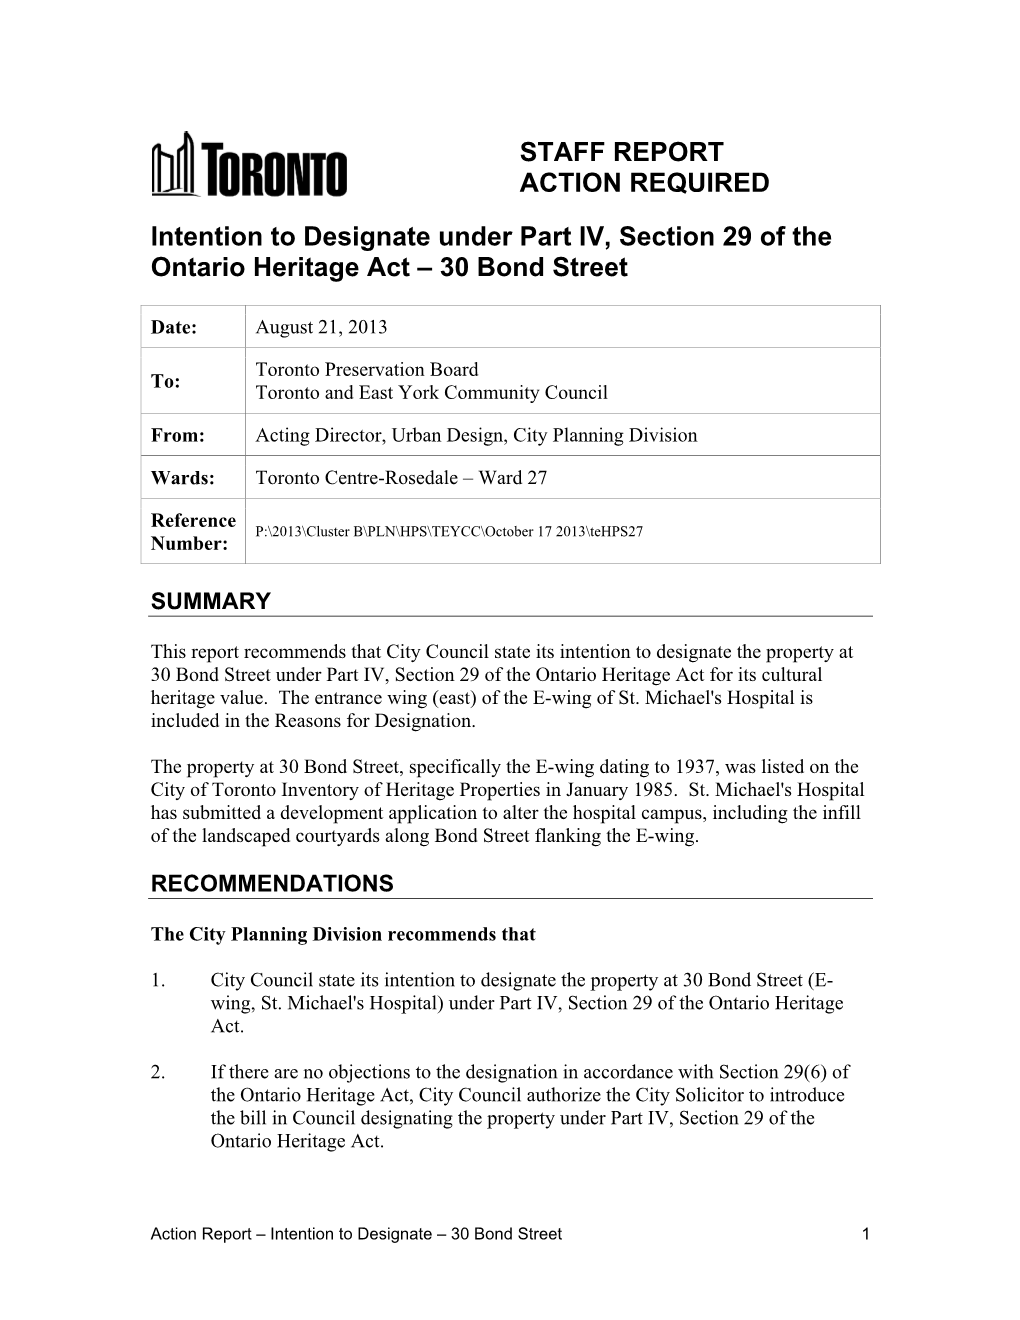 STAFF REPORT ACTION REQUIRED Intention to Designate Under Part IV, Section 29 of the Ontario Heritage Act – 30 Bond Street